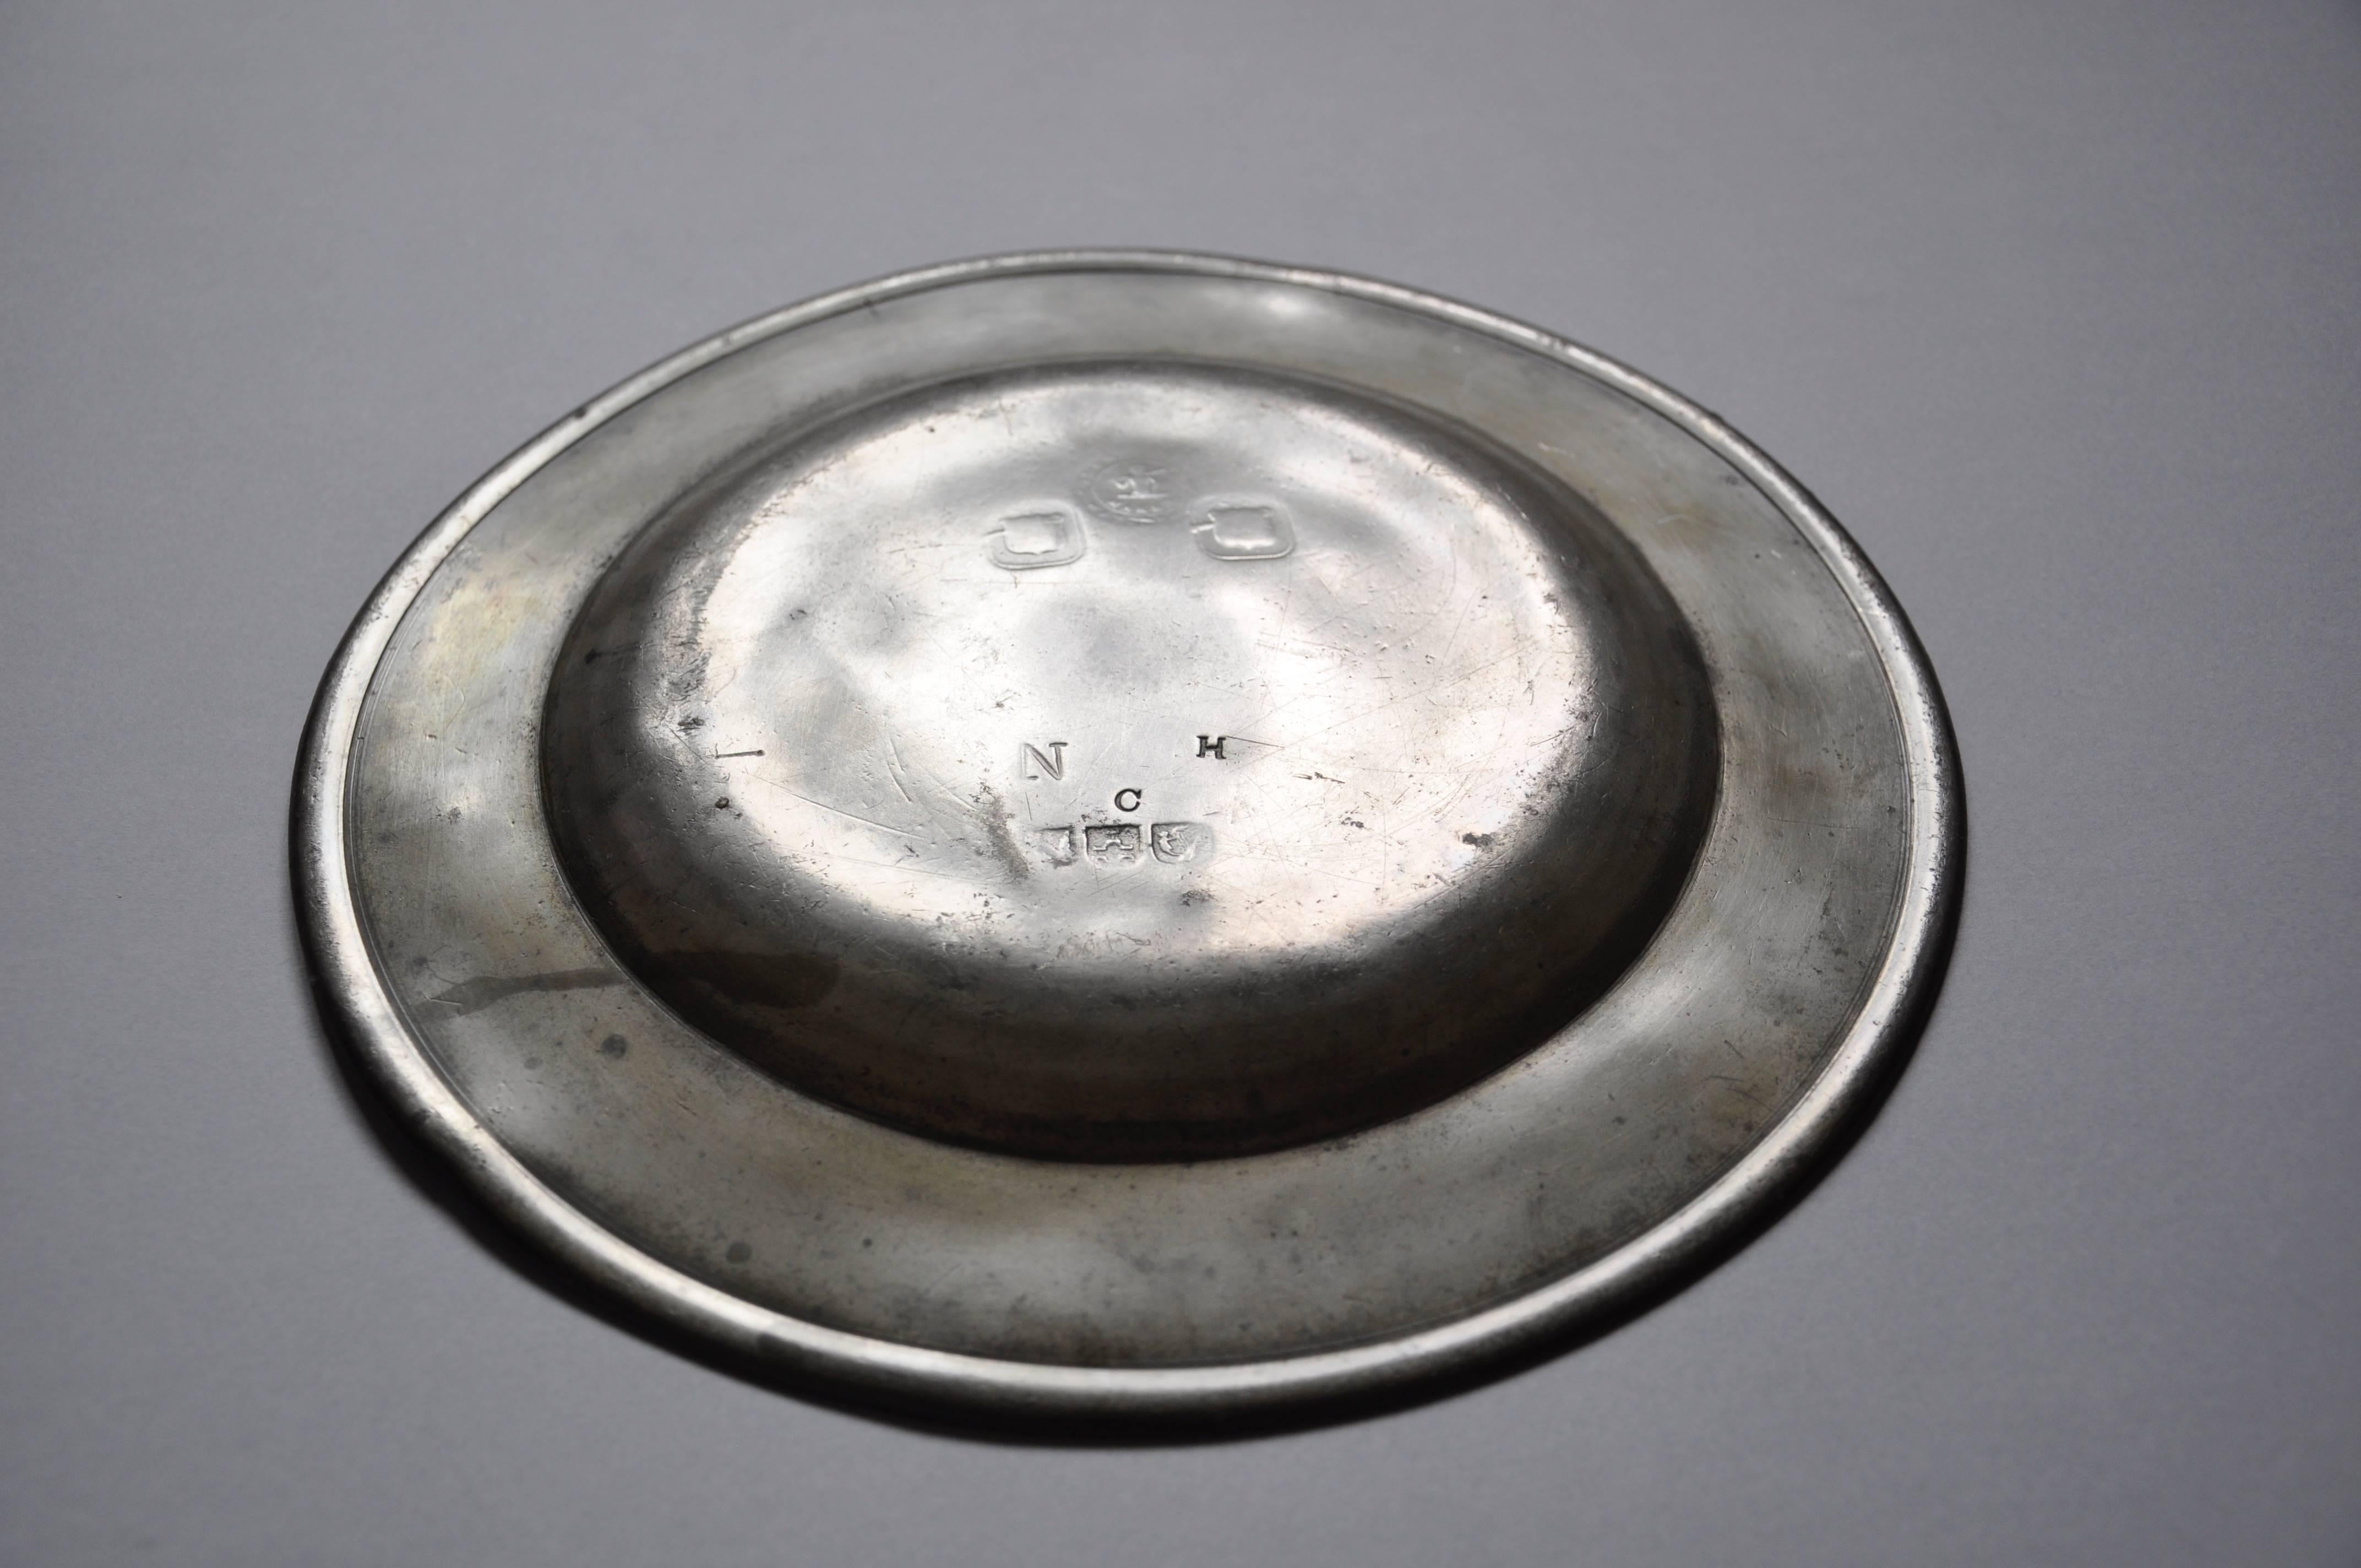 A fine example of an Irish antique, a functional metal plate made by Charles Clarke of Waterford who worked from about 1788-1810. Plain normal-width rim with incised inner single circle reeding. On the back the hallmarks can be made out as the